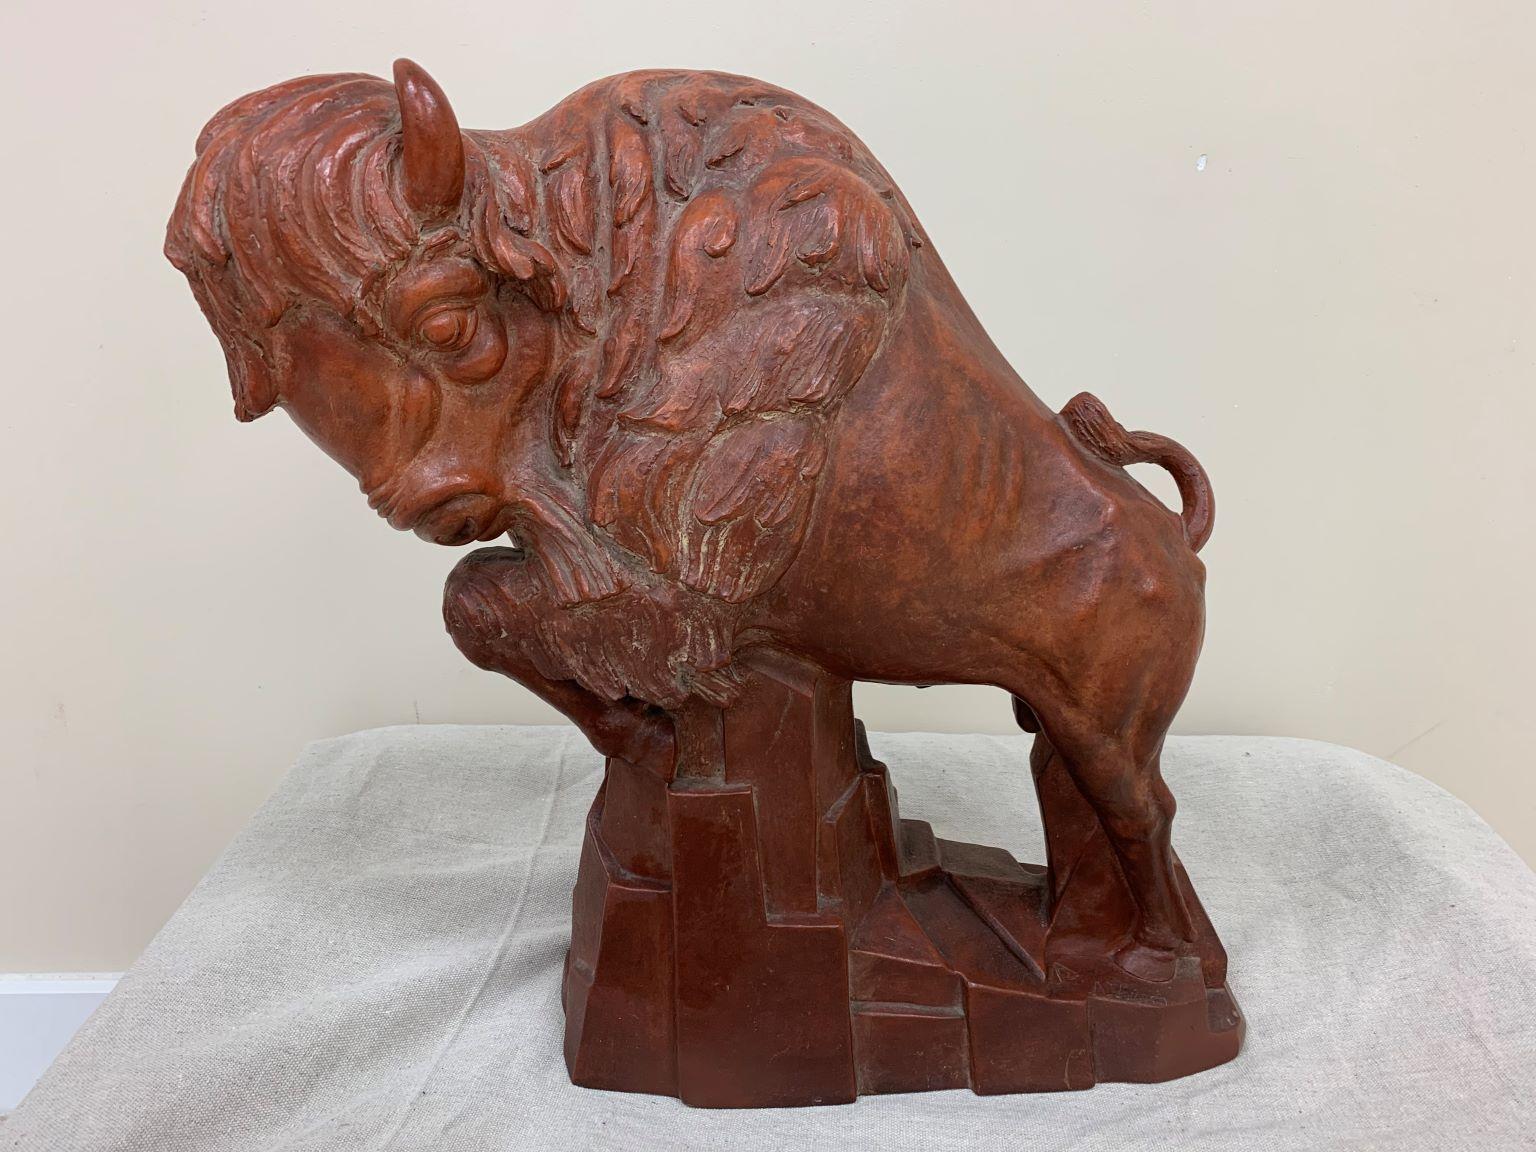 WPA terracotta buffalo sculpture by Anthony Vozech, circa 1930s. Dimensions: 8” wide 20” high 22” deep. Minor wear on the bottom edge.
Anthony Vozech was an Ohio artist that did WPA work in the 1930s and 1940s. One of his most famous works was an